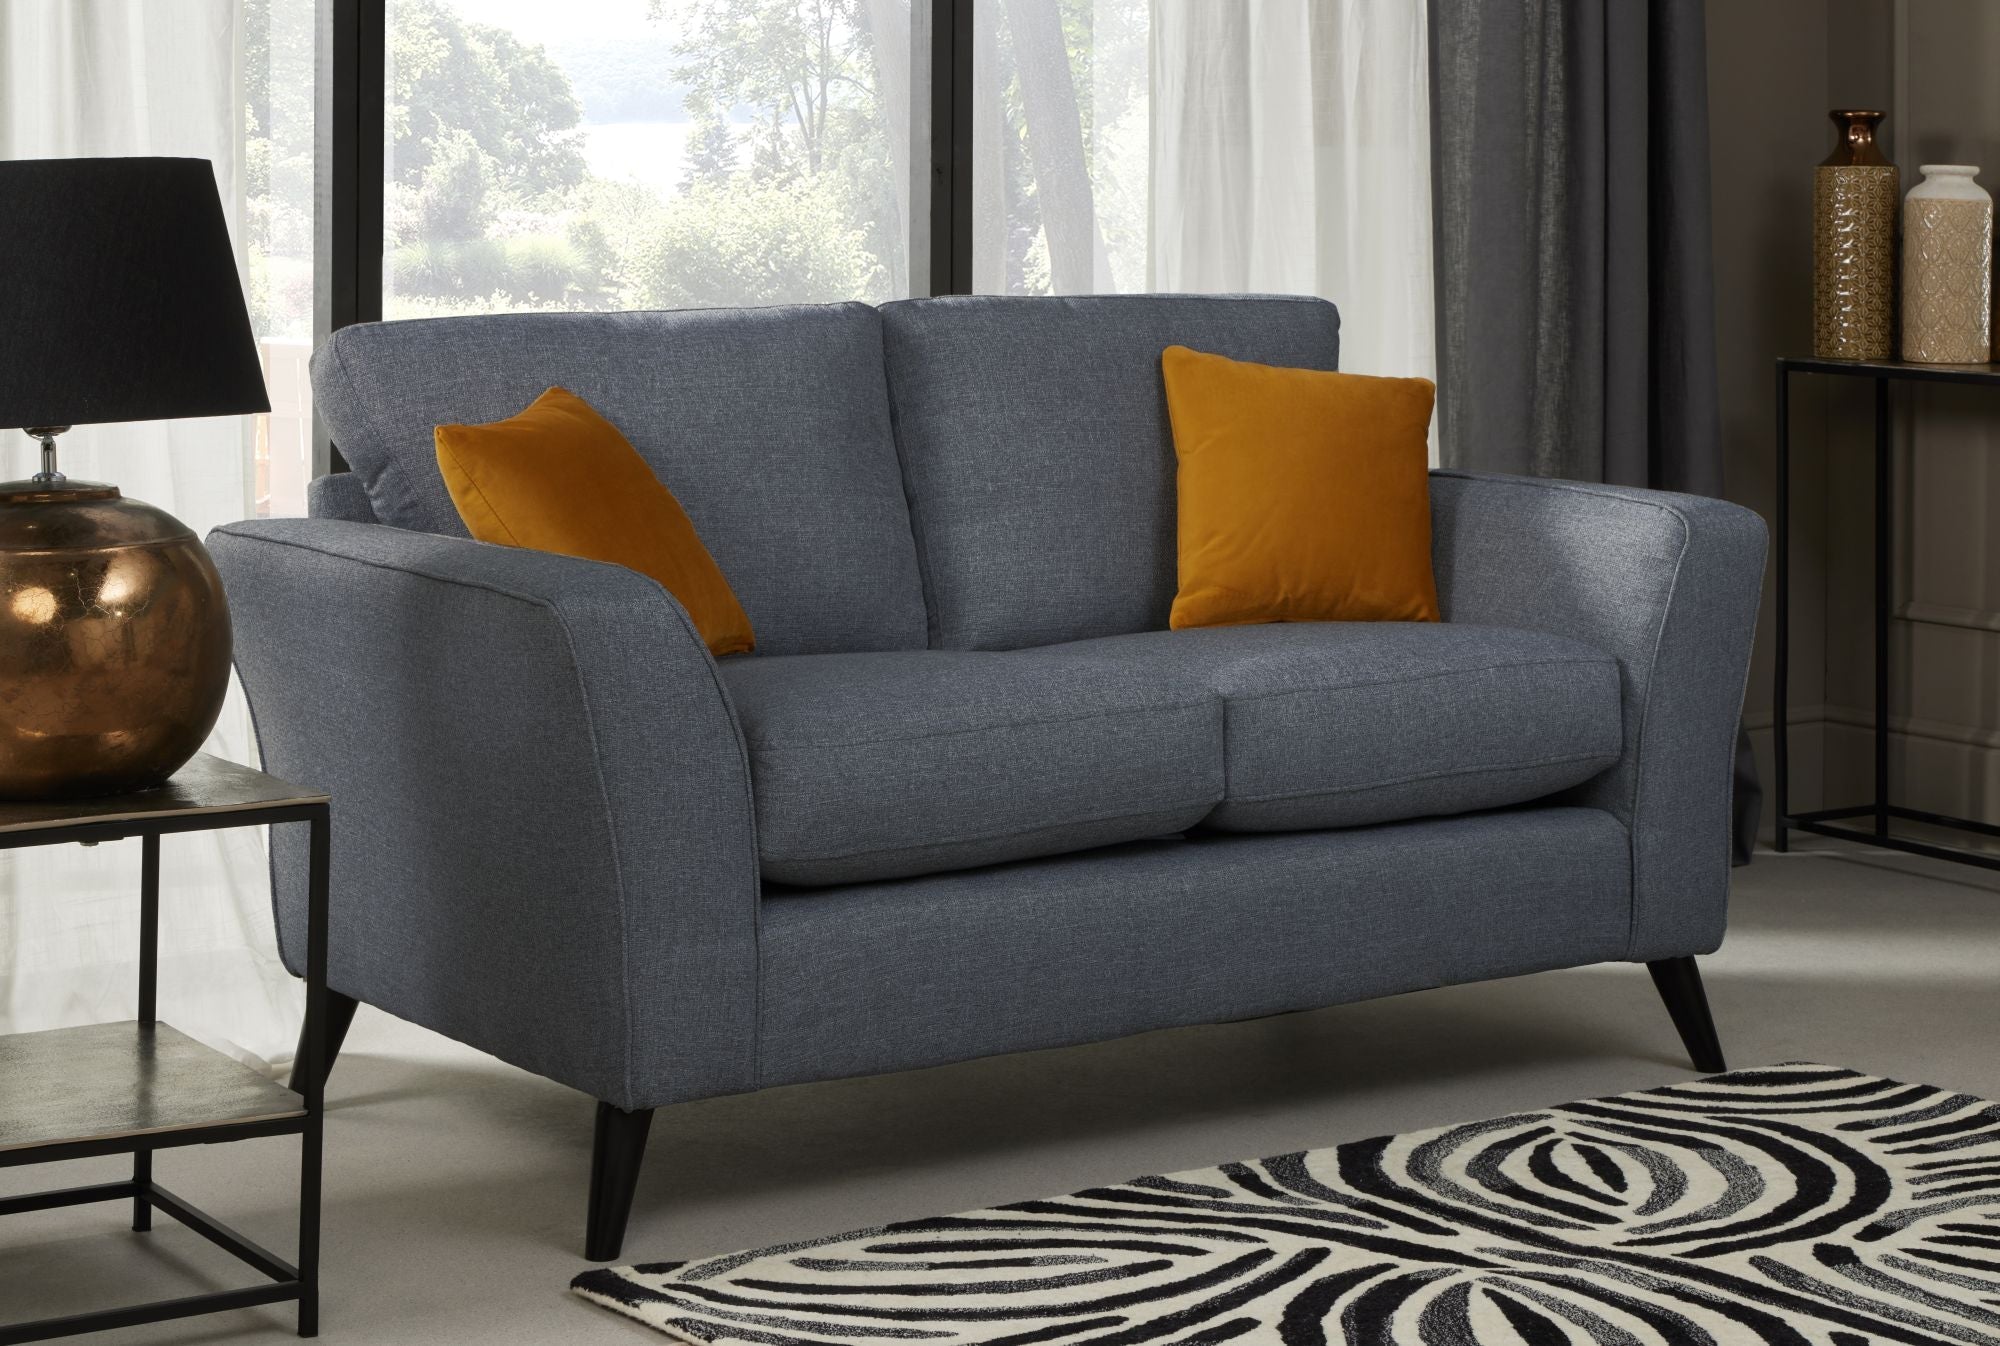 Libby 2 seater sofa in denim shown as room set up 